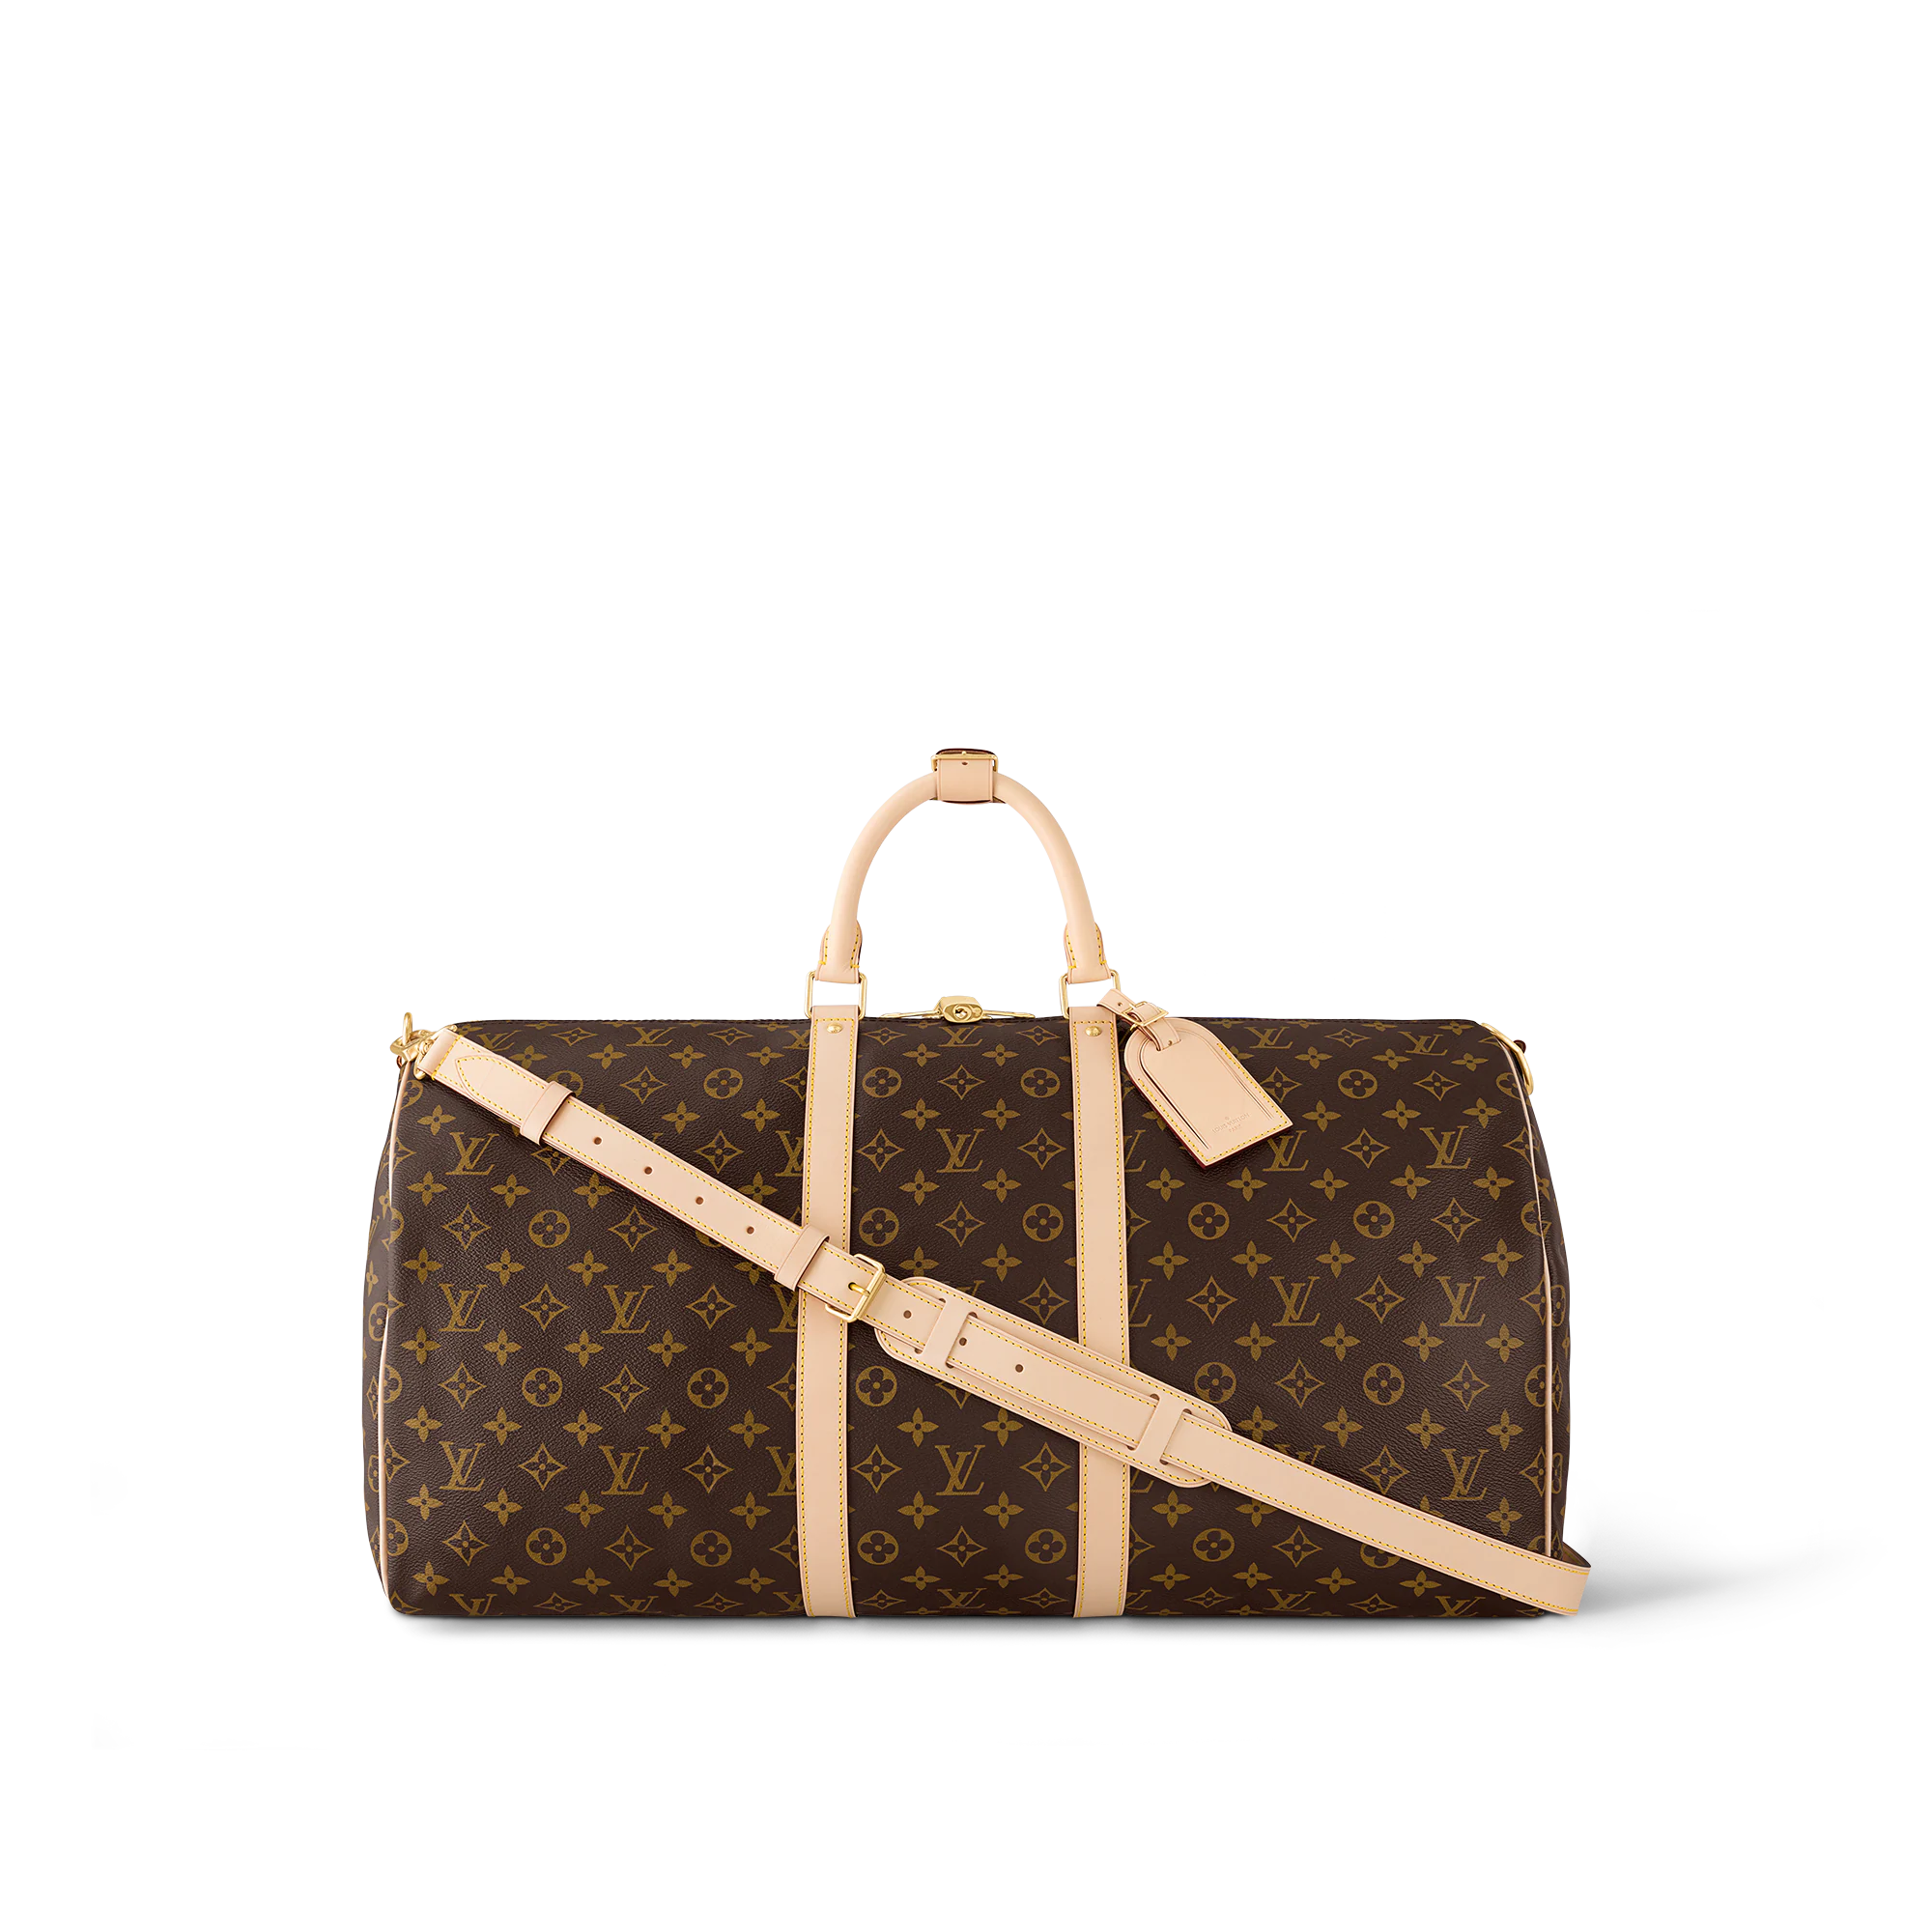 Louis Vuitton Pink bag for women  Buy or Sell your LV bags - Vestiaire  Collective